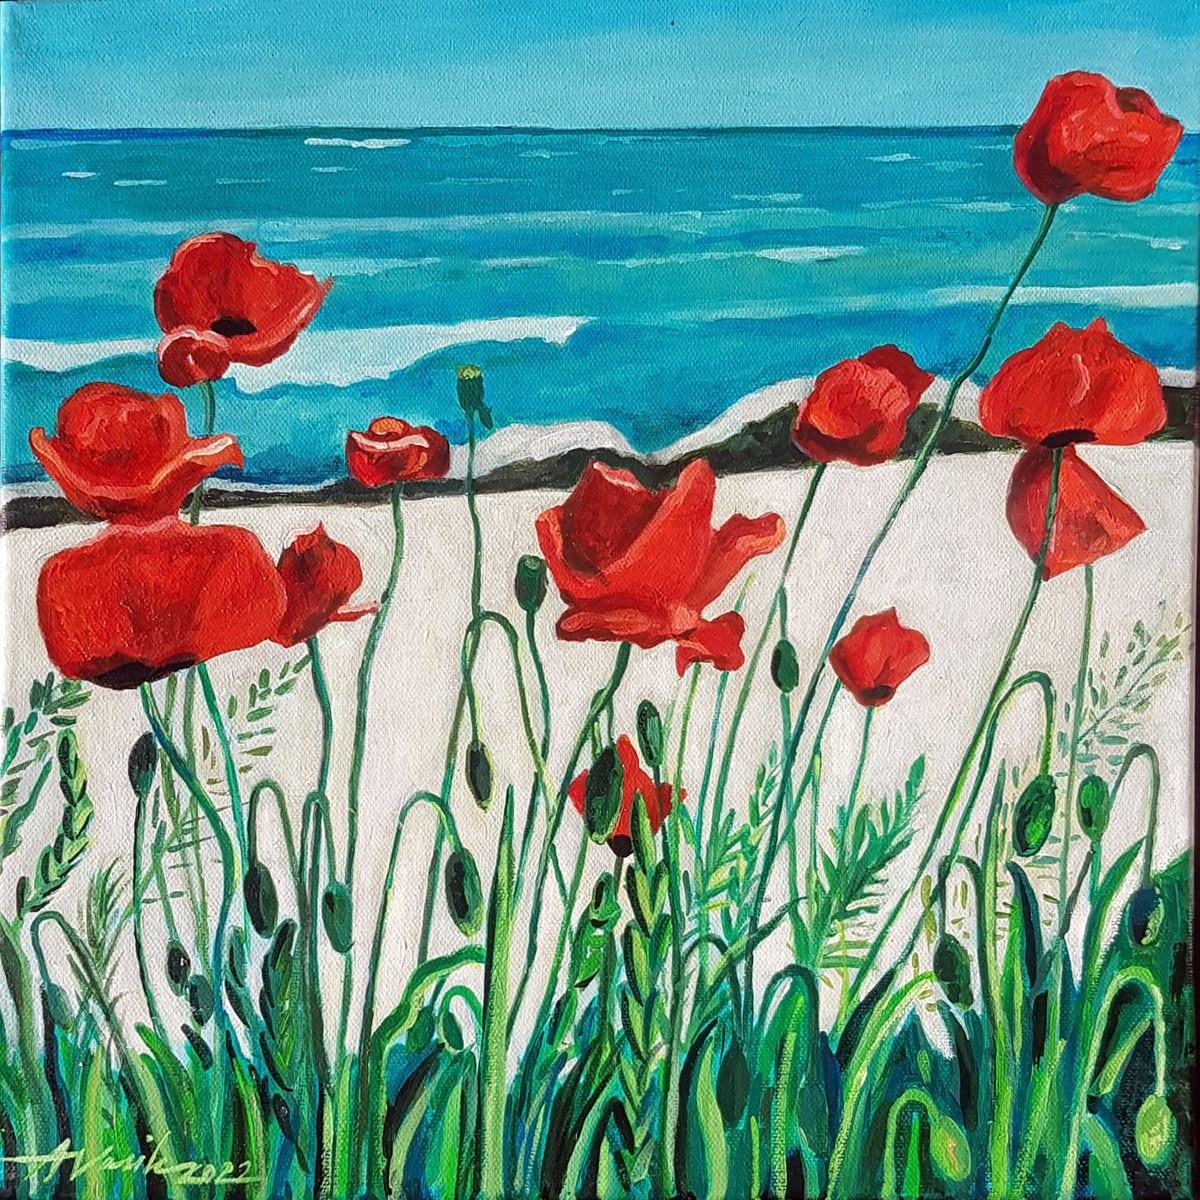 Poppies at the Seaside by Adriana Vasile